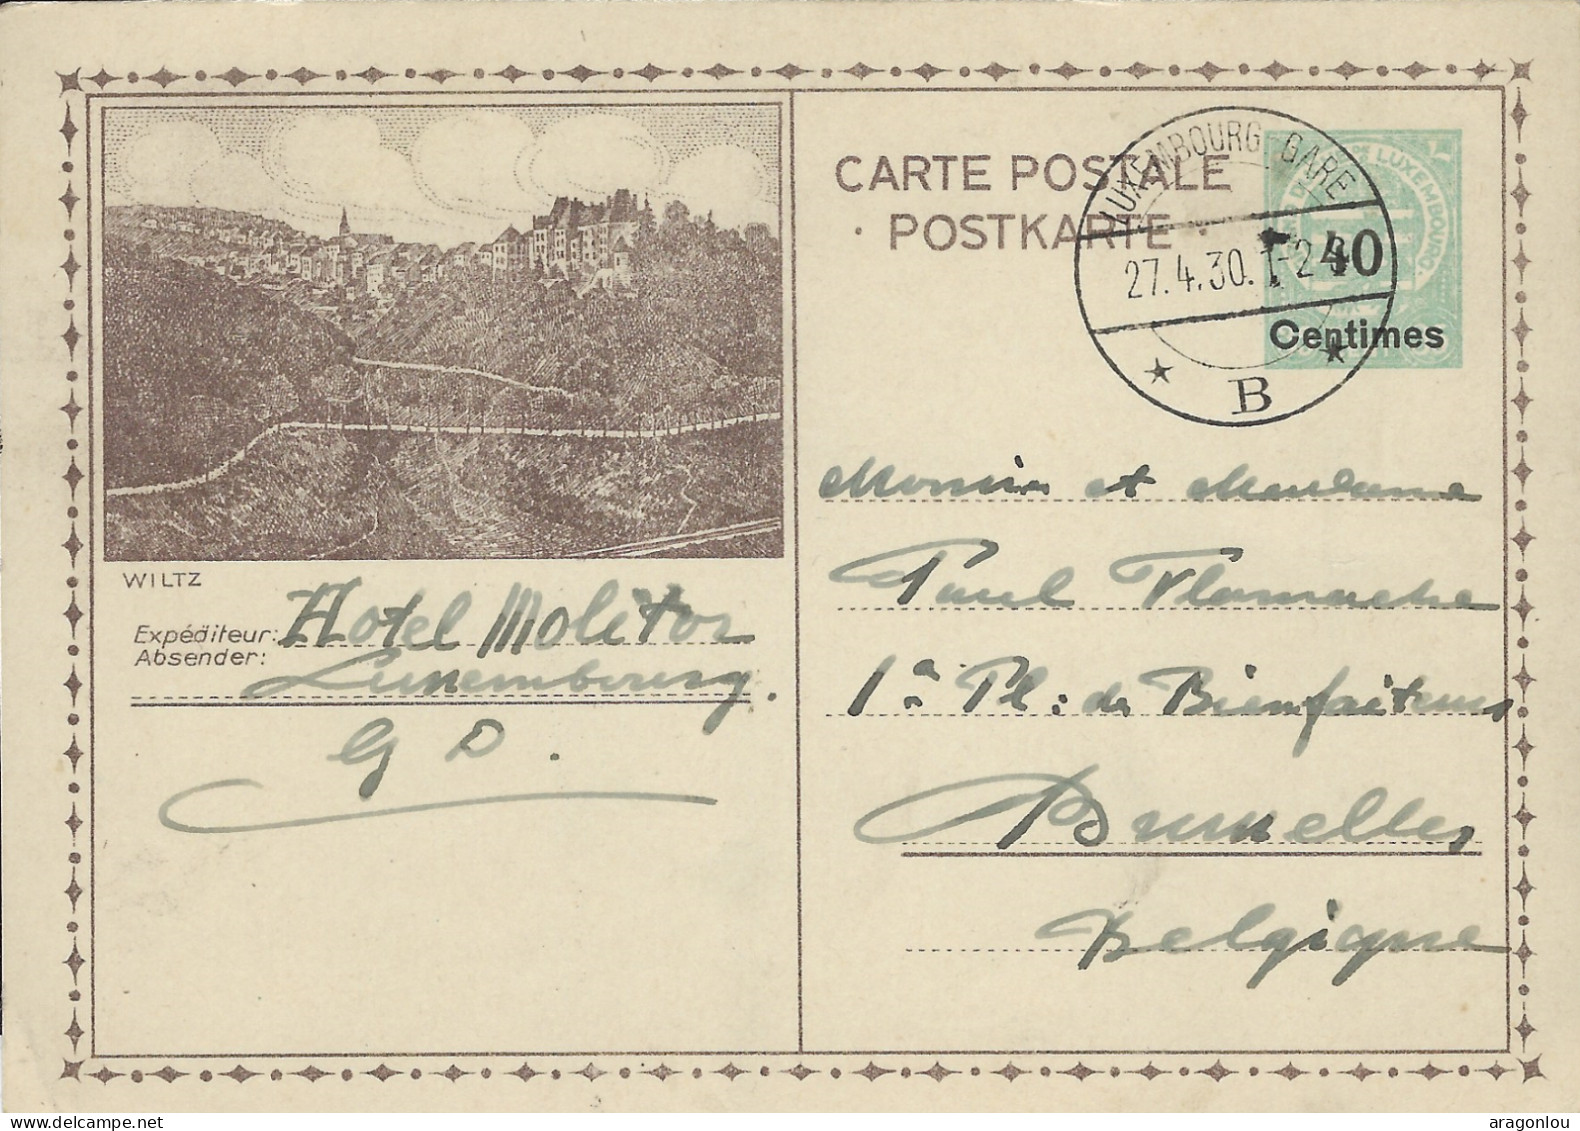 Luxembourg - Luxemburg - Carte-Postale  1930  -  Wiltz  -   Cachet  Luxembourg - Stamped Stationery